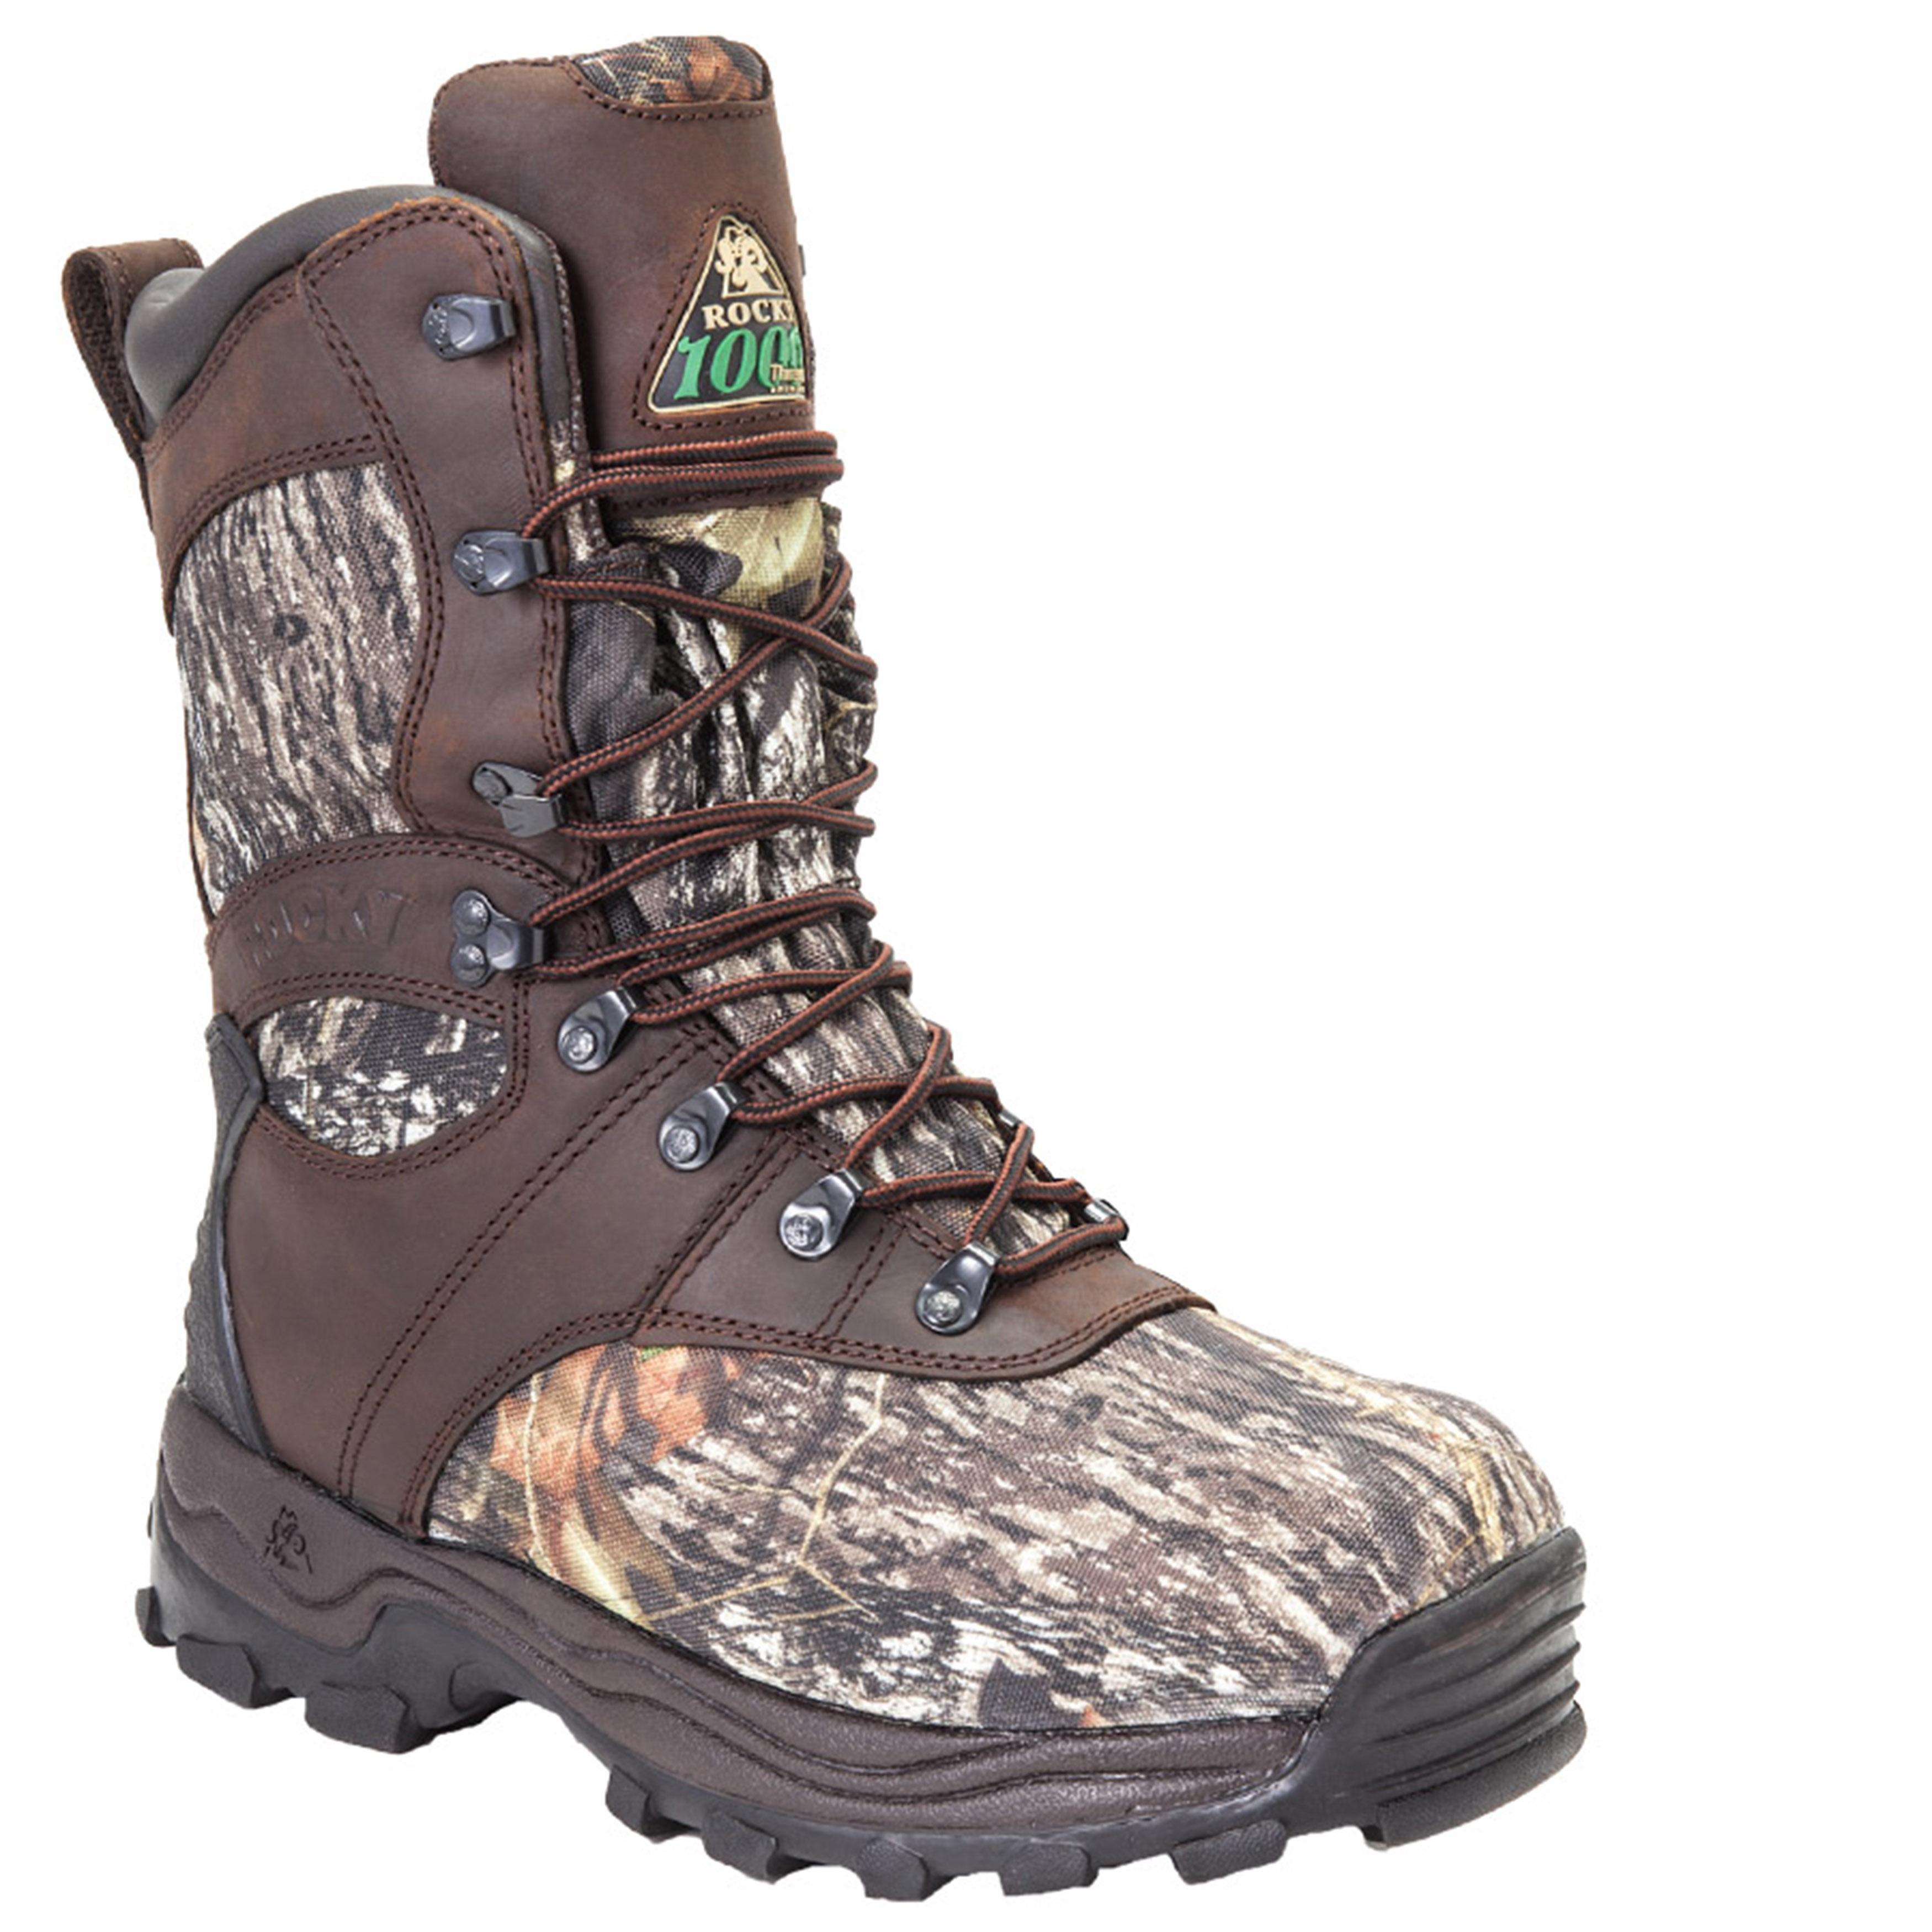 Rocky Sport Utility Max Boot | Buy the 100 Gram Rocky Men's Sport Utility  Pro Hunting Boot at Rocky Boots